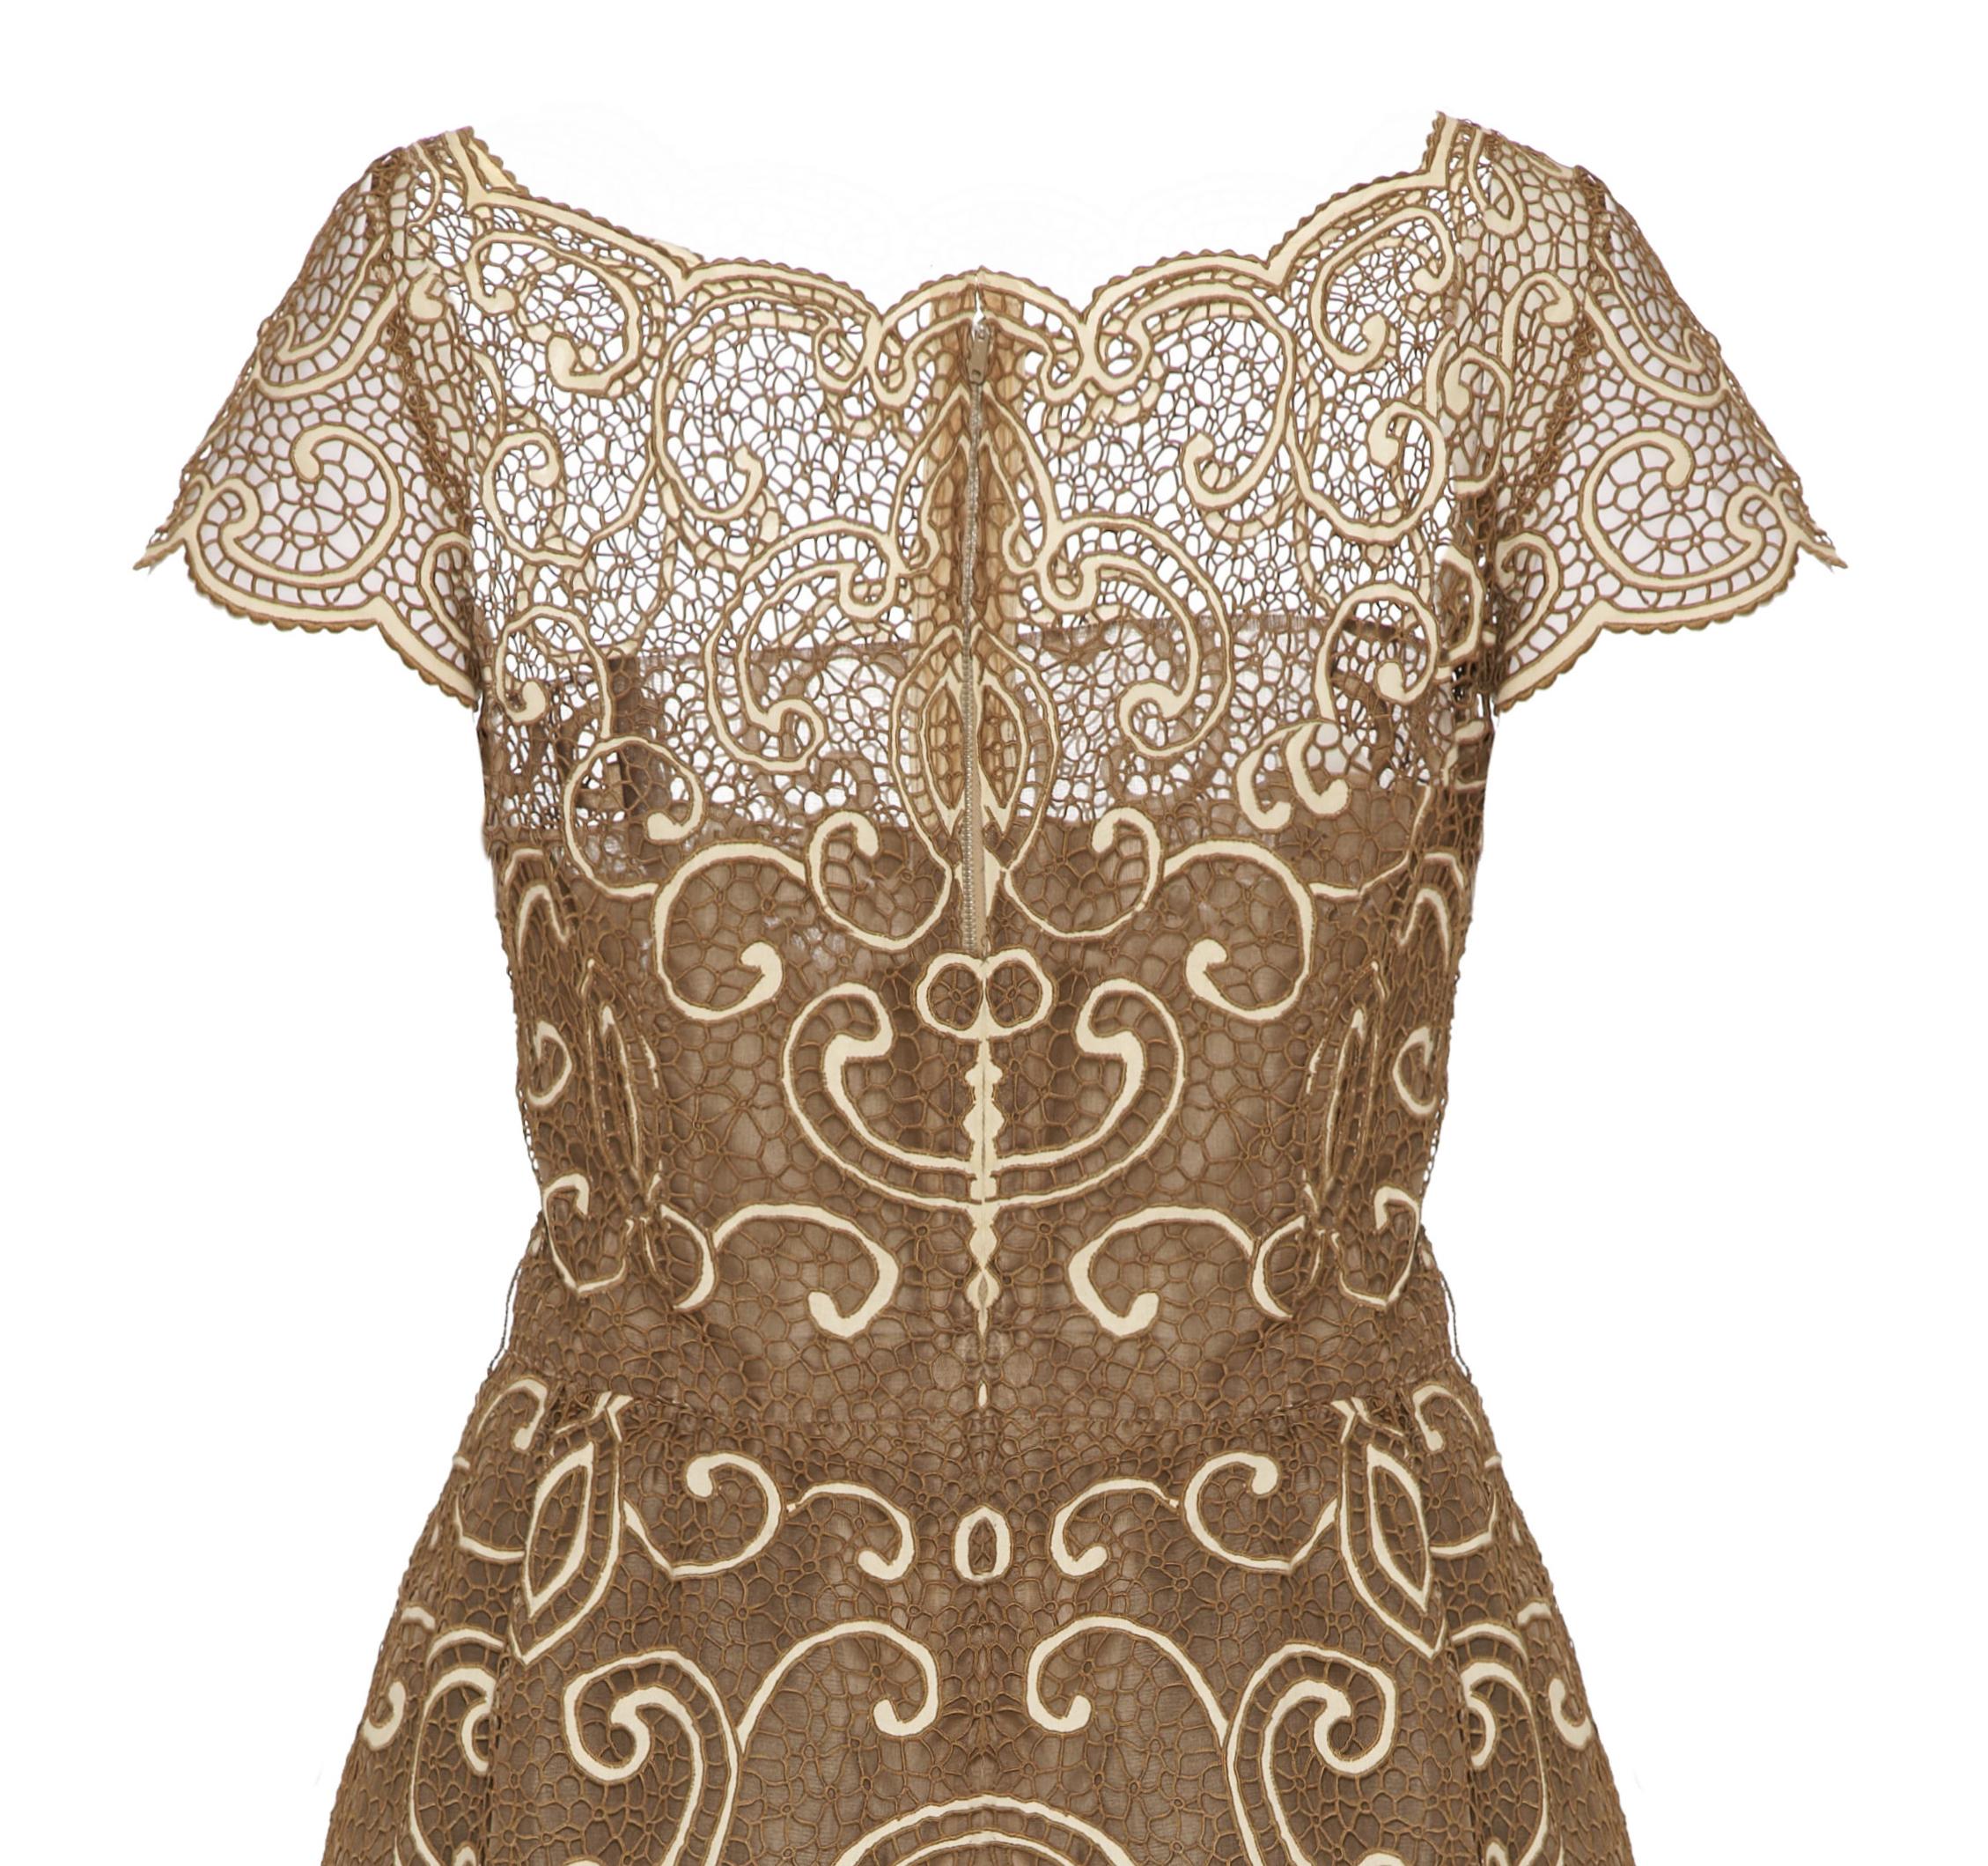 Saks 5th Avenue 1960s Samuel Winston Embroidered Lace Dress In Excellent Condition For Sale In London, GB